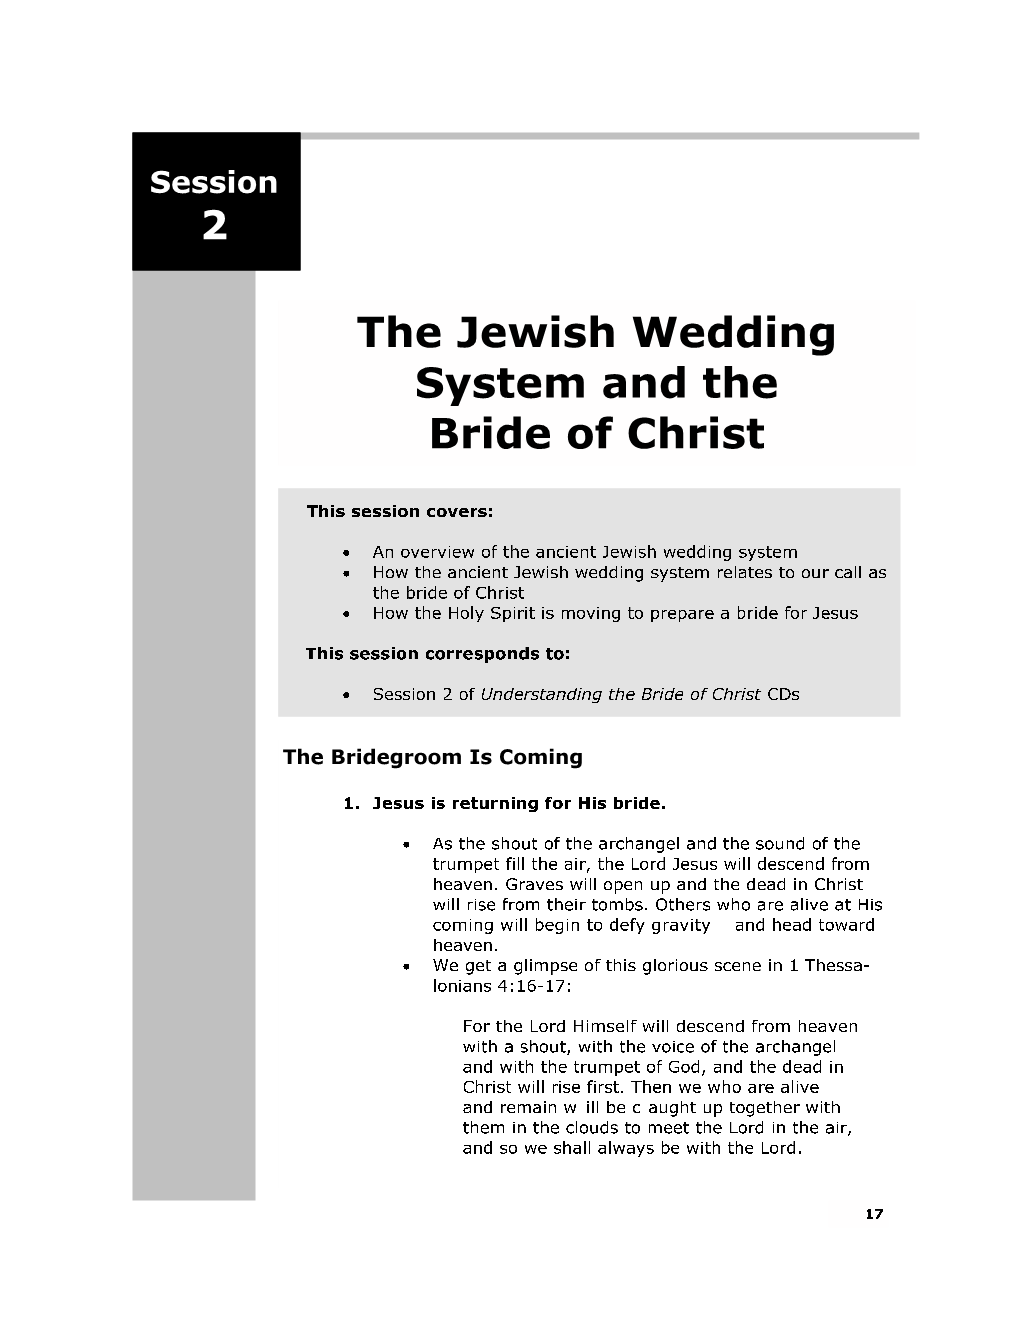 The Jewish Wedding System and the Bride of Christ